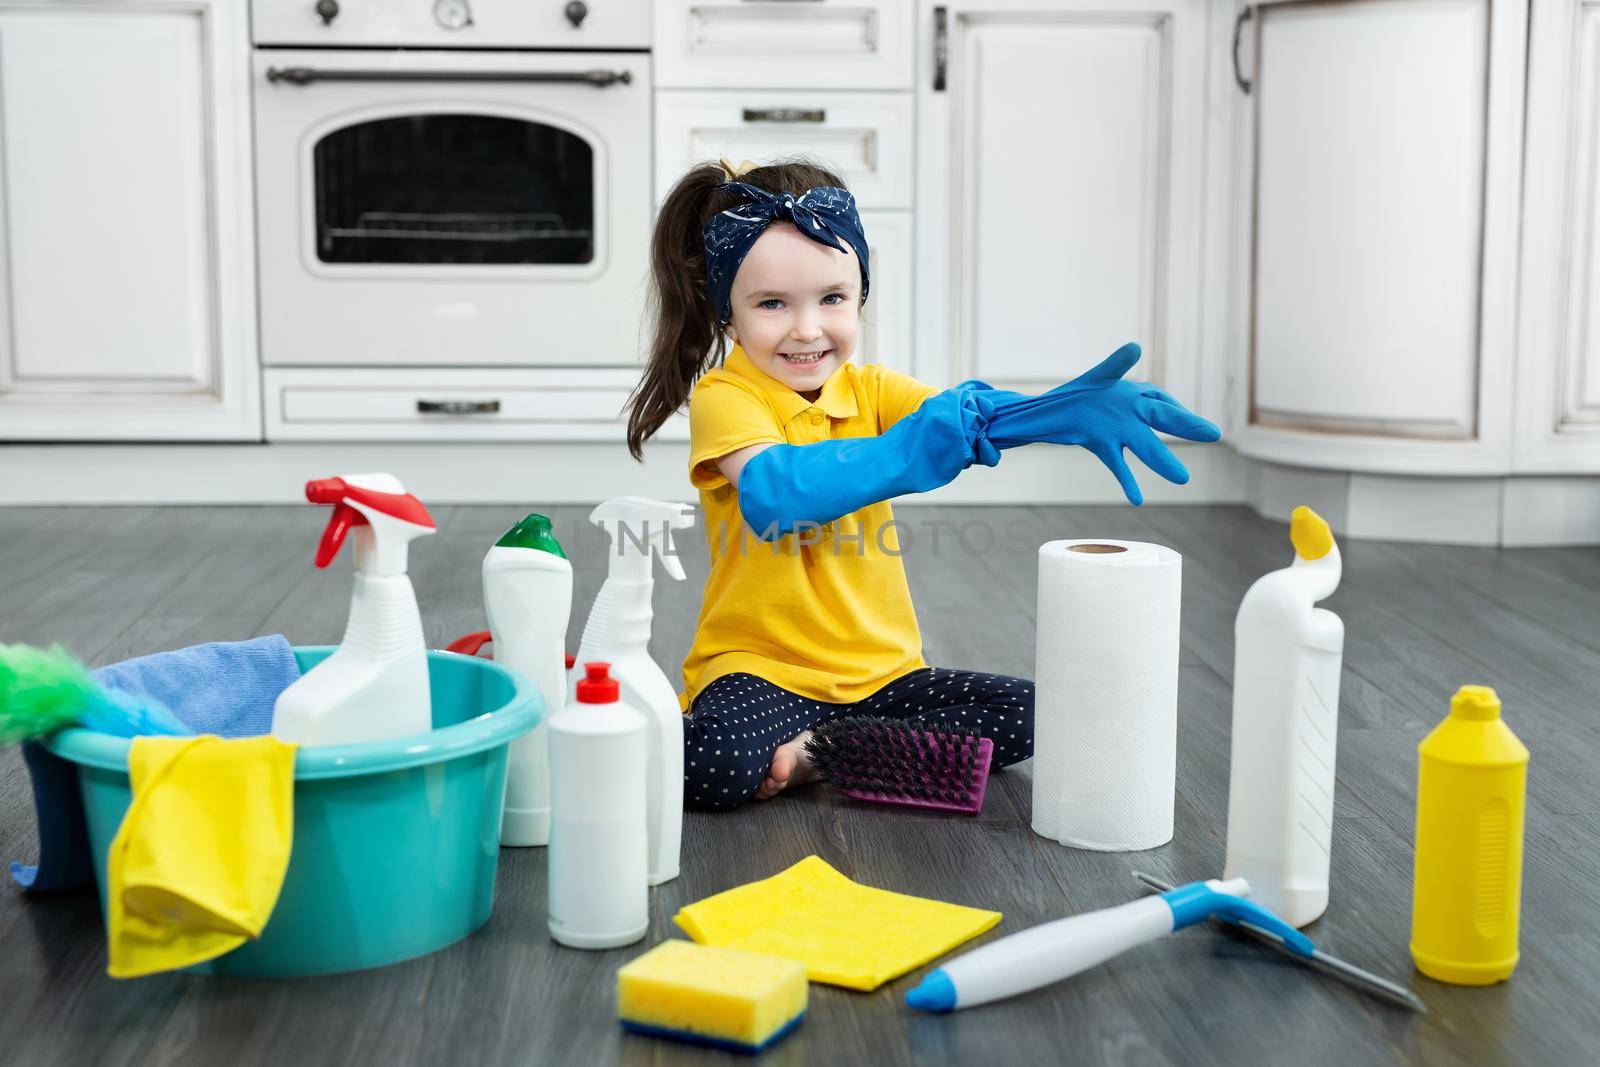 A little girl puts on gloves while cleaning the kitchen by StudioPeace